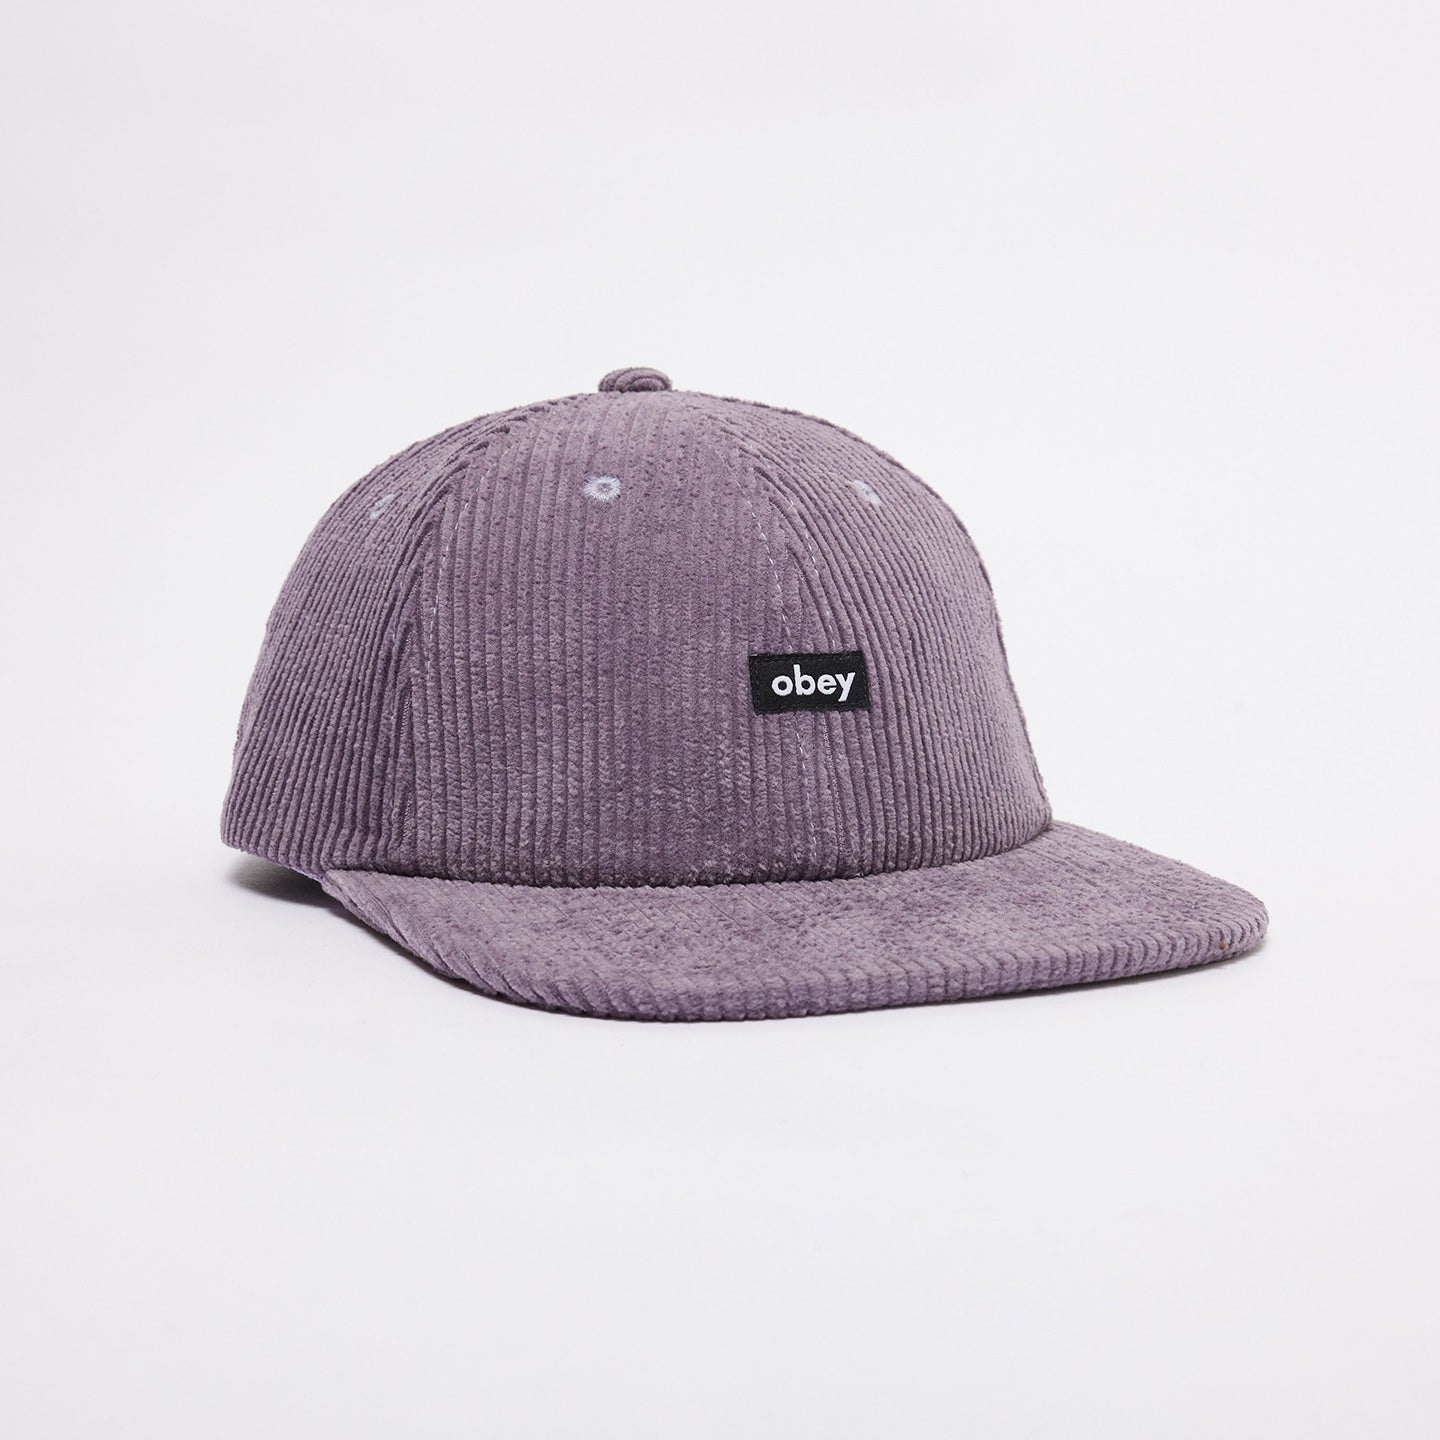 OBEY CORD LABEL 6 PANEL STRAP WINEBERRY